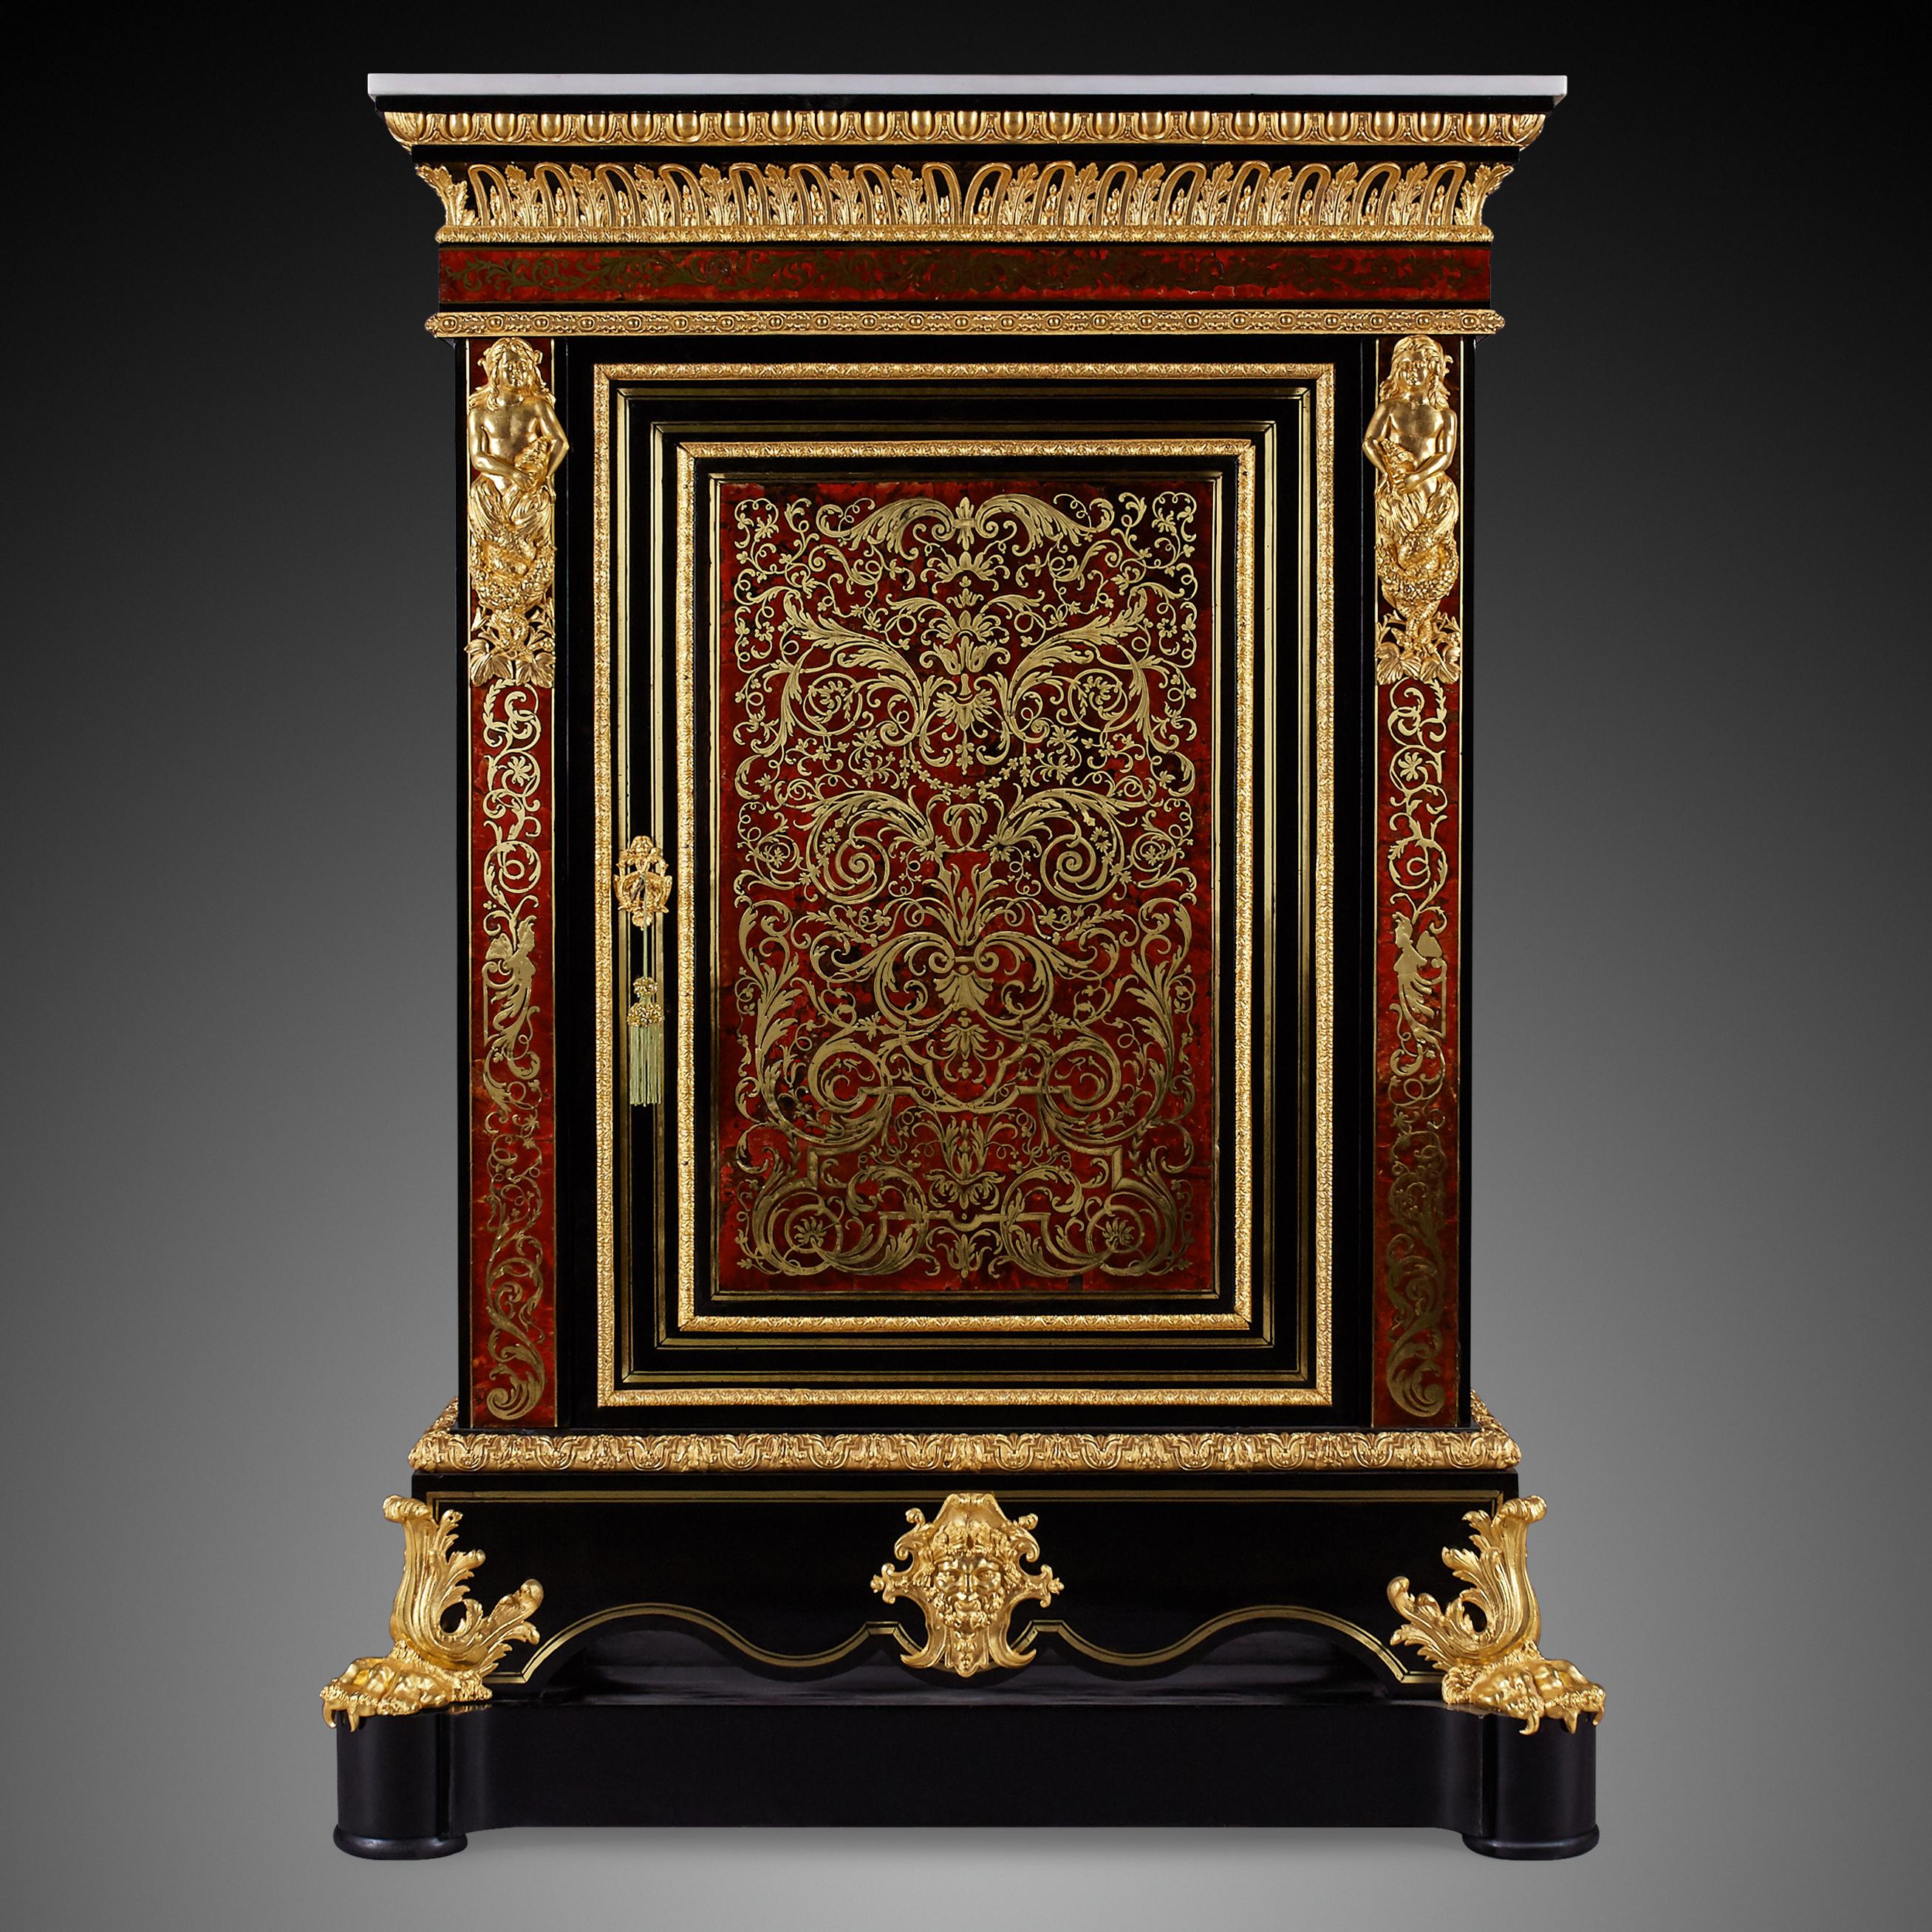 A sensational and extremely high quality French 19th century Napoleon III Period ebony, brass and ormolu.